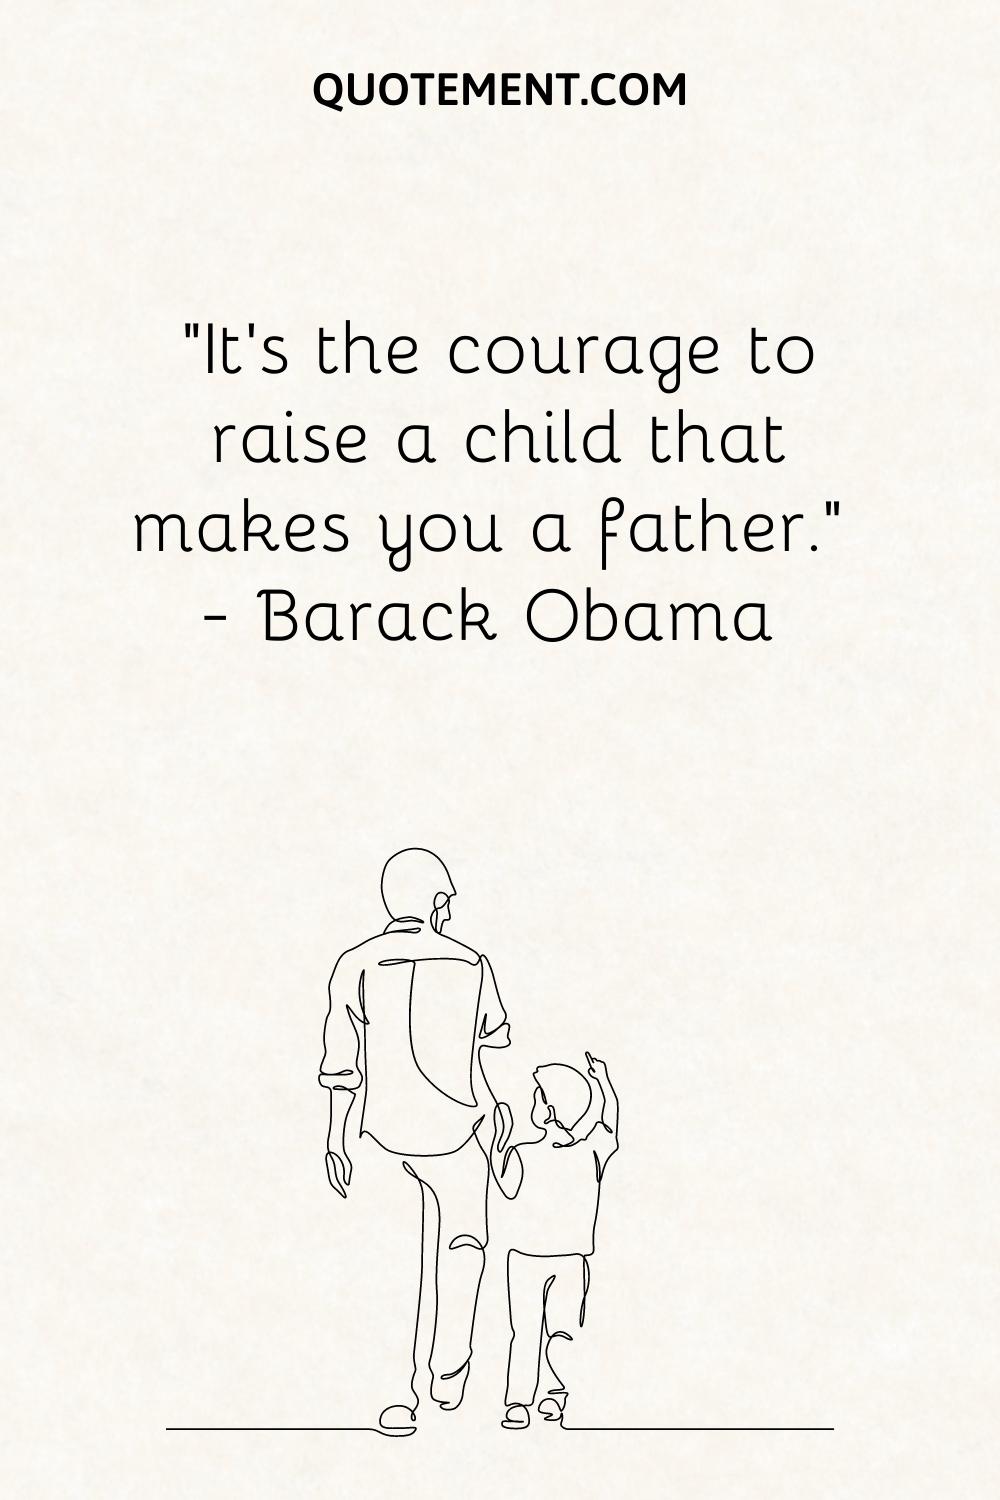 “It’s the courage to raise a child that makes you a father.” — Barack Obama